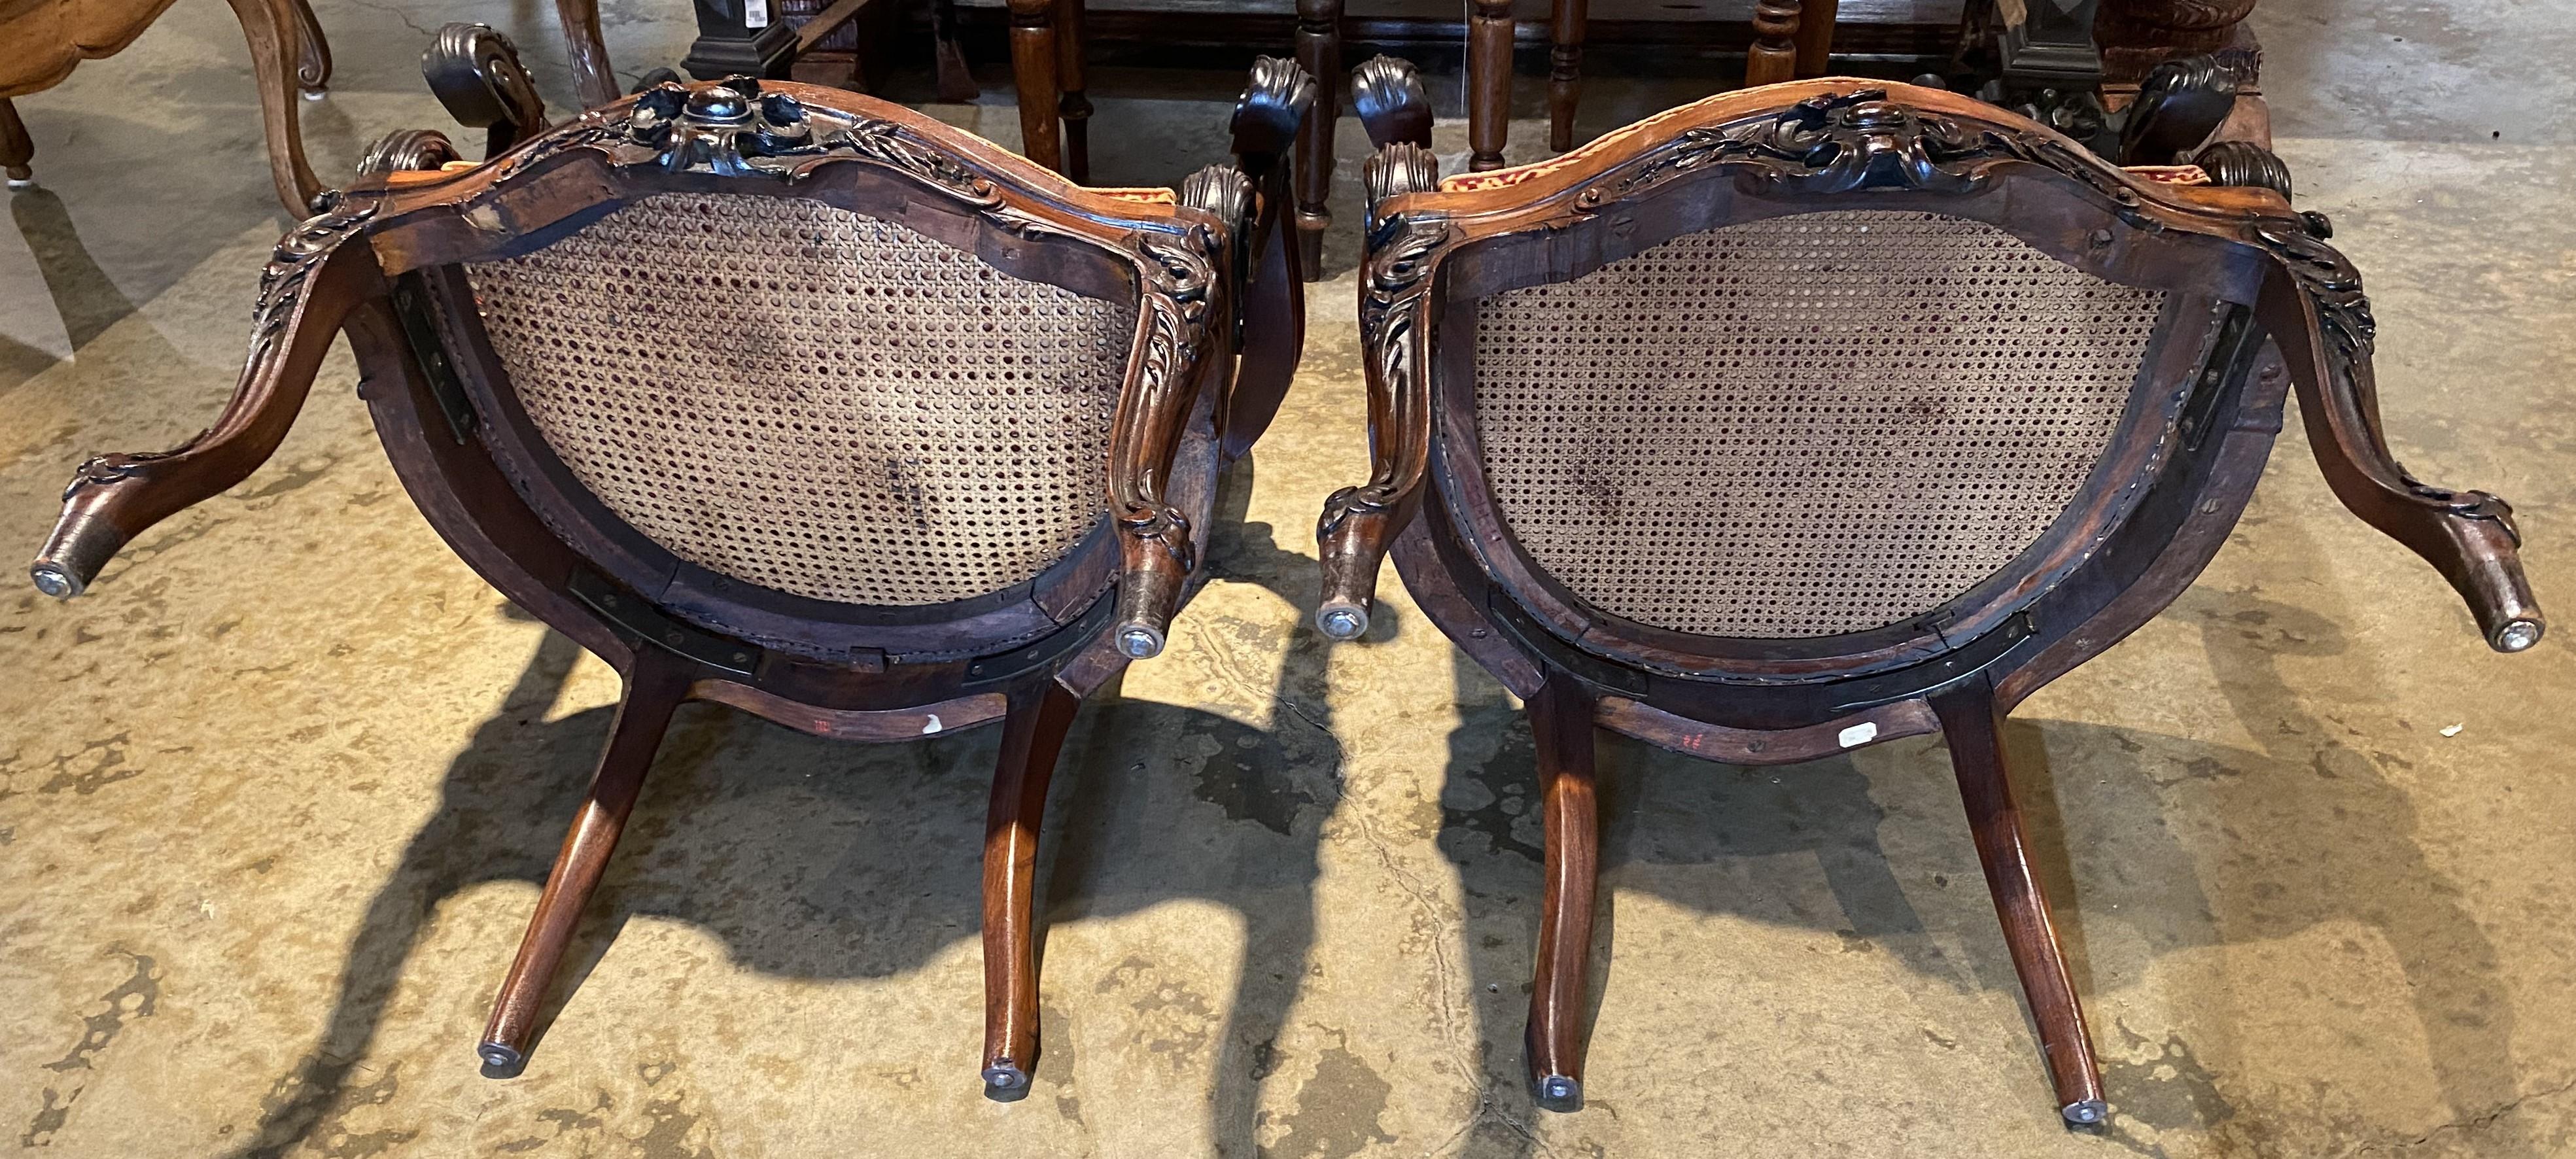 Pair of British 19th Century Carved Walnut Open Armchairs w/ Caned Backs & Seats For Sale 9